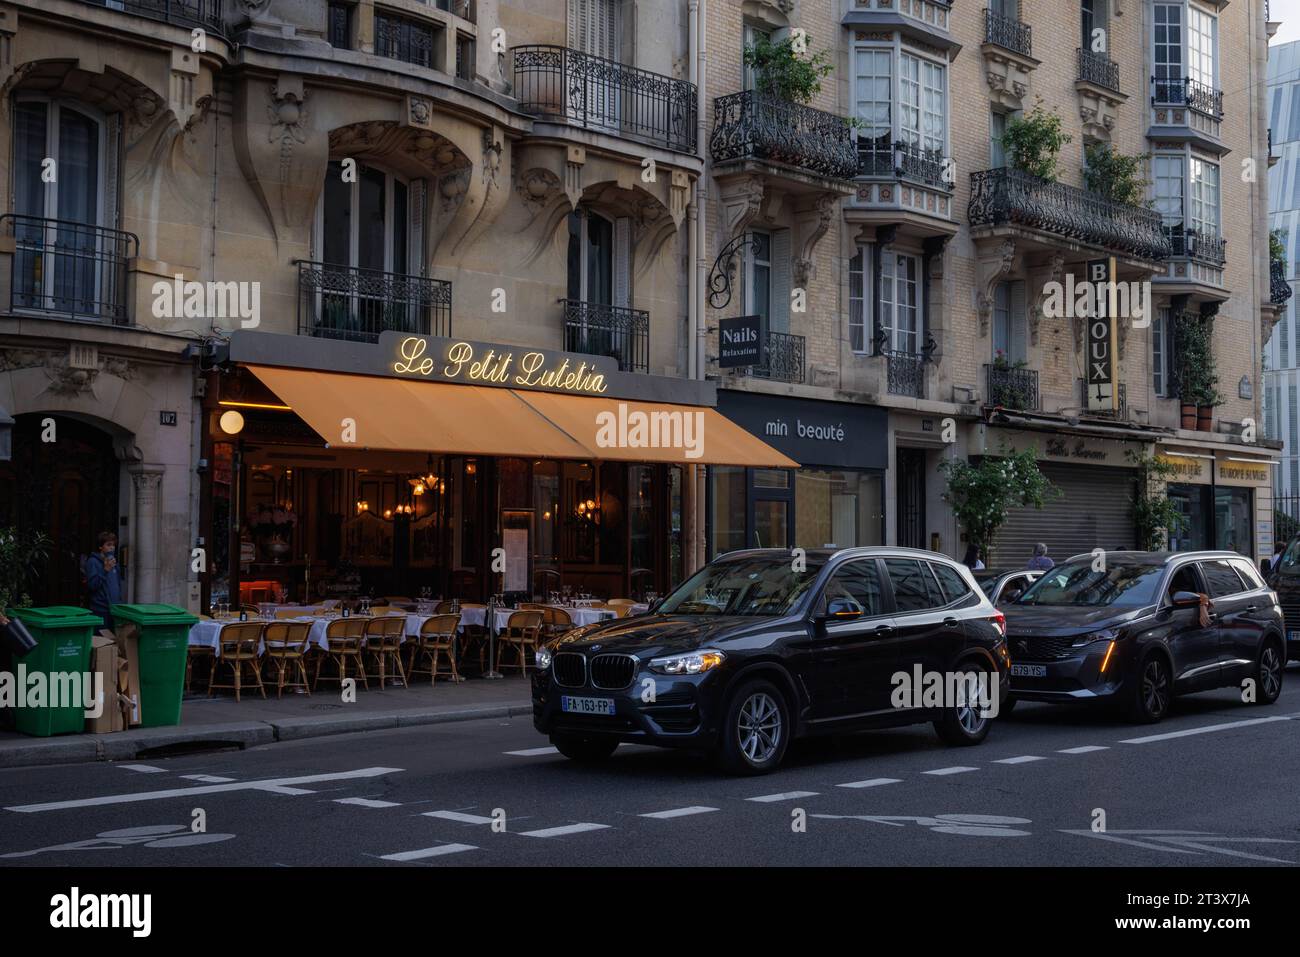 Street scenes outside a cafe in Paris, France. Stock Photo